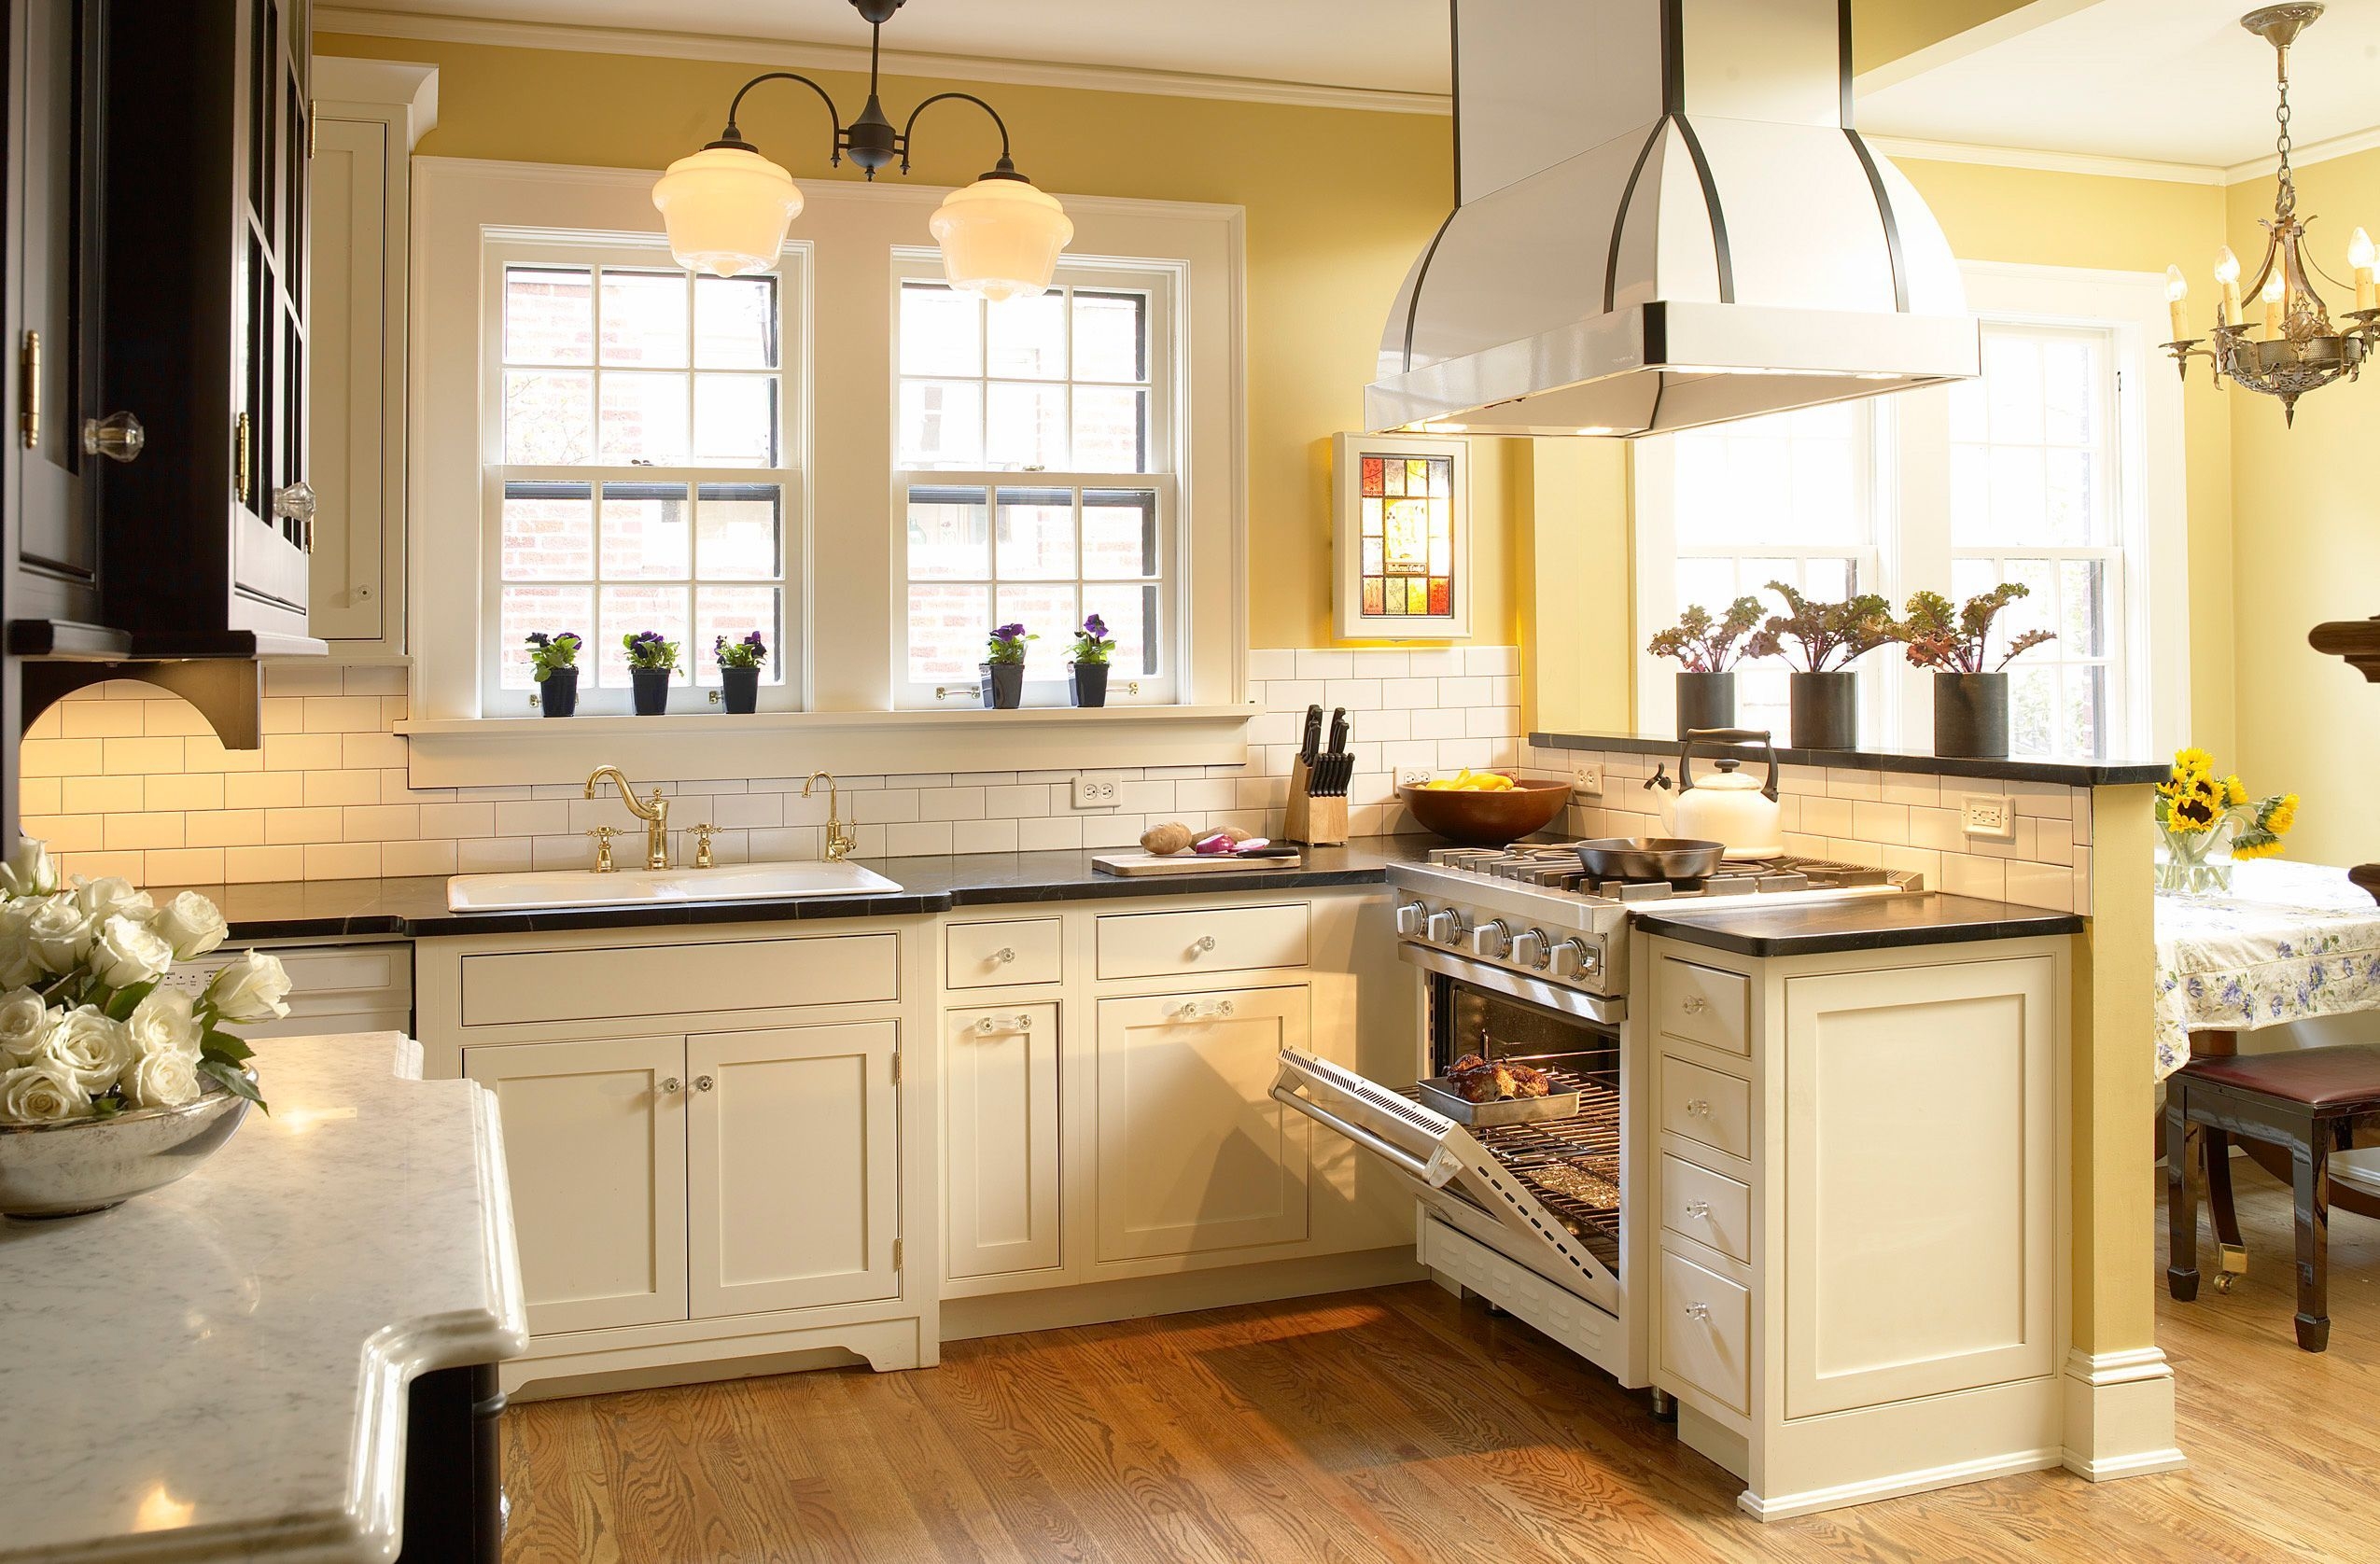 Antique White Kitchen Cabinets You Ll Love In 2021 Visualhunt